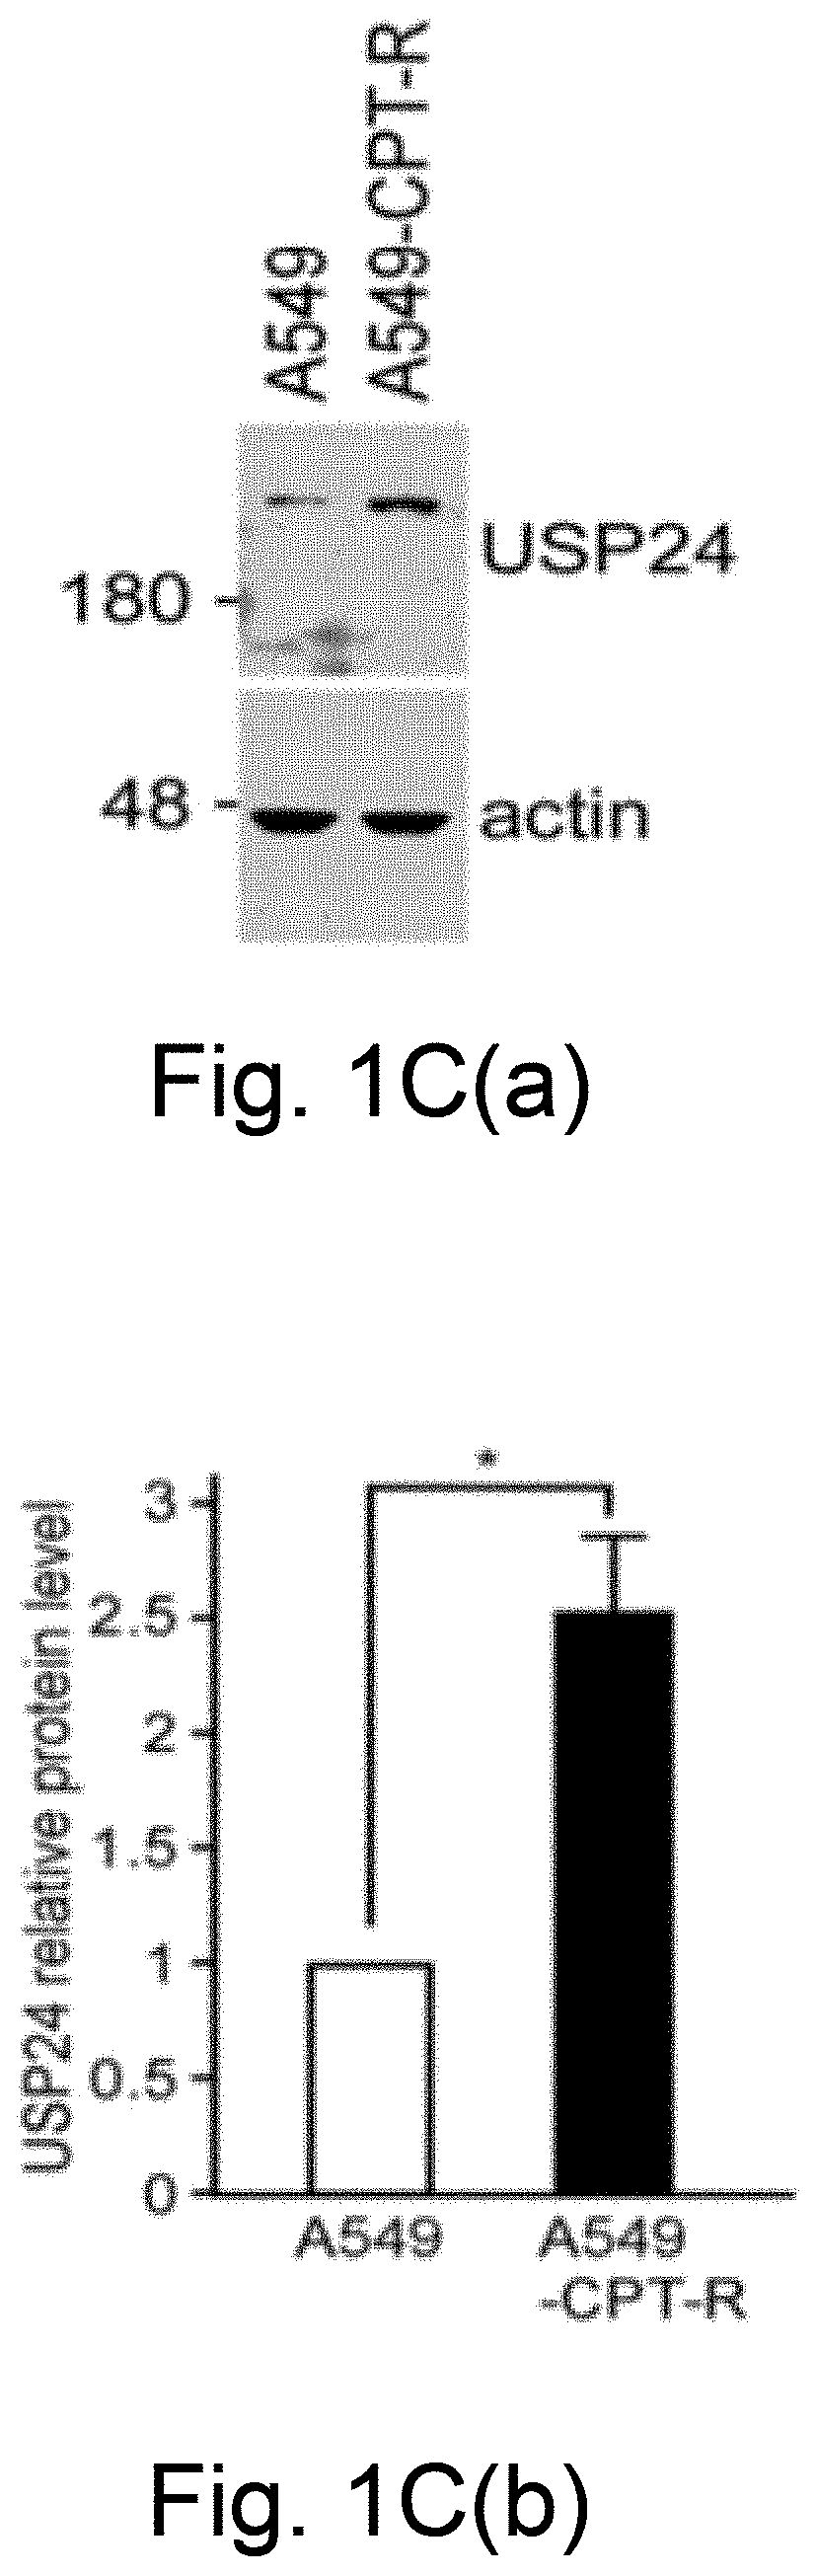 Ubiquitin-specific peptidase 24 inhibitor, medicinal composition and method of delaying or reversing multidrug resistance in cancers using the same